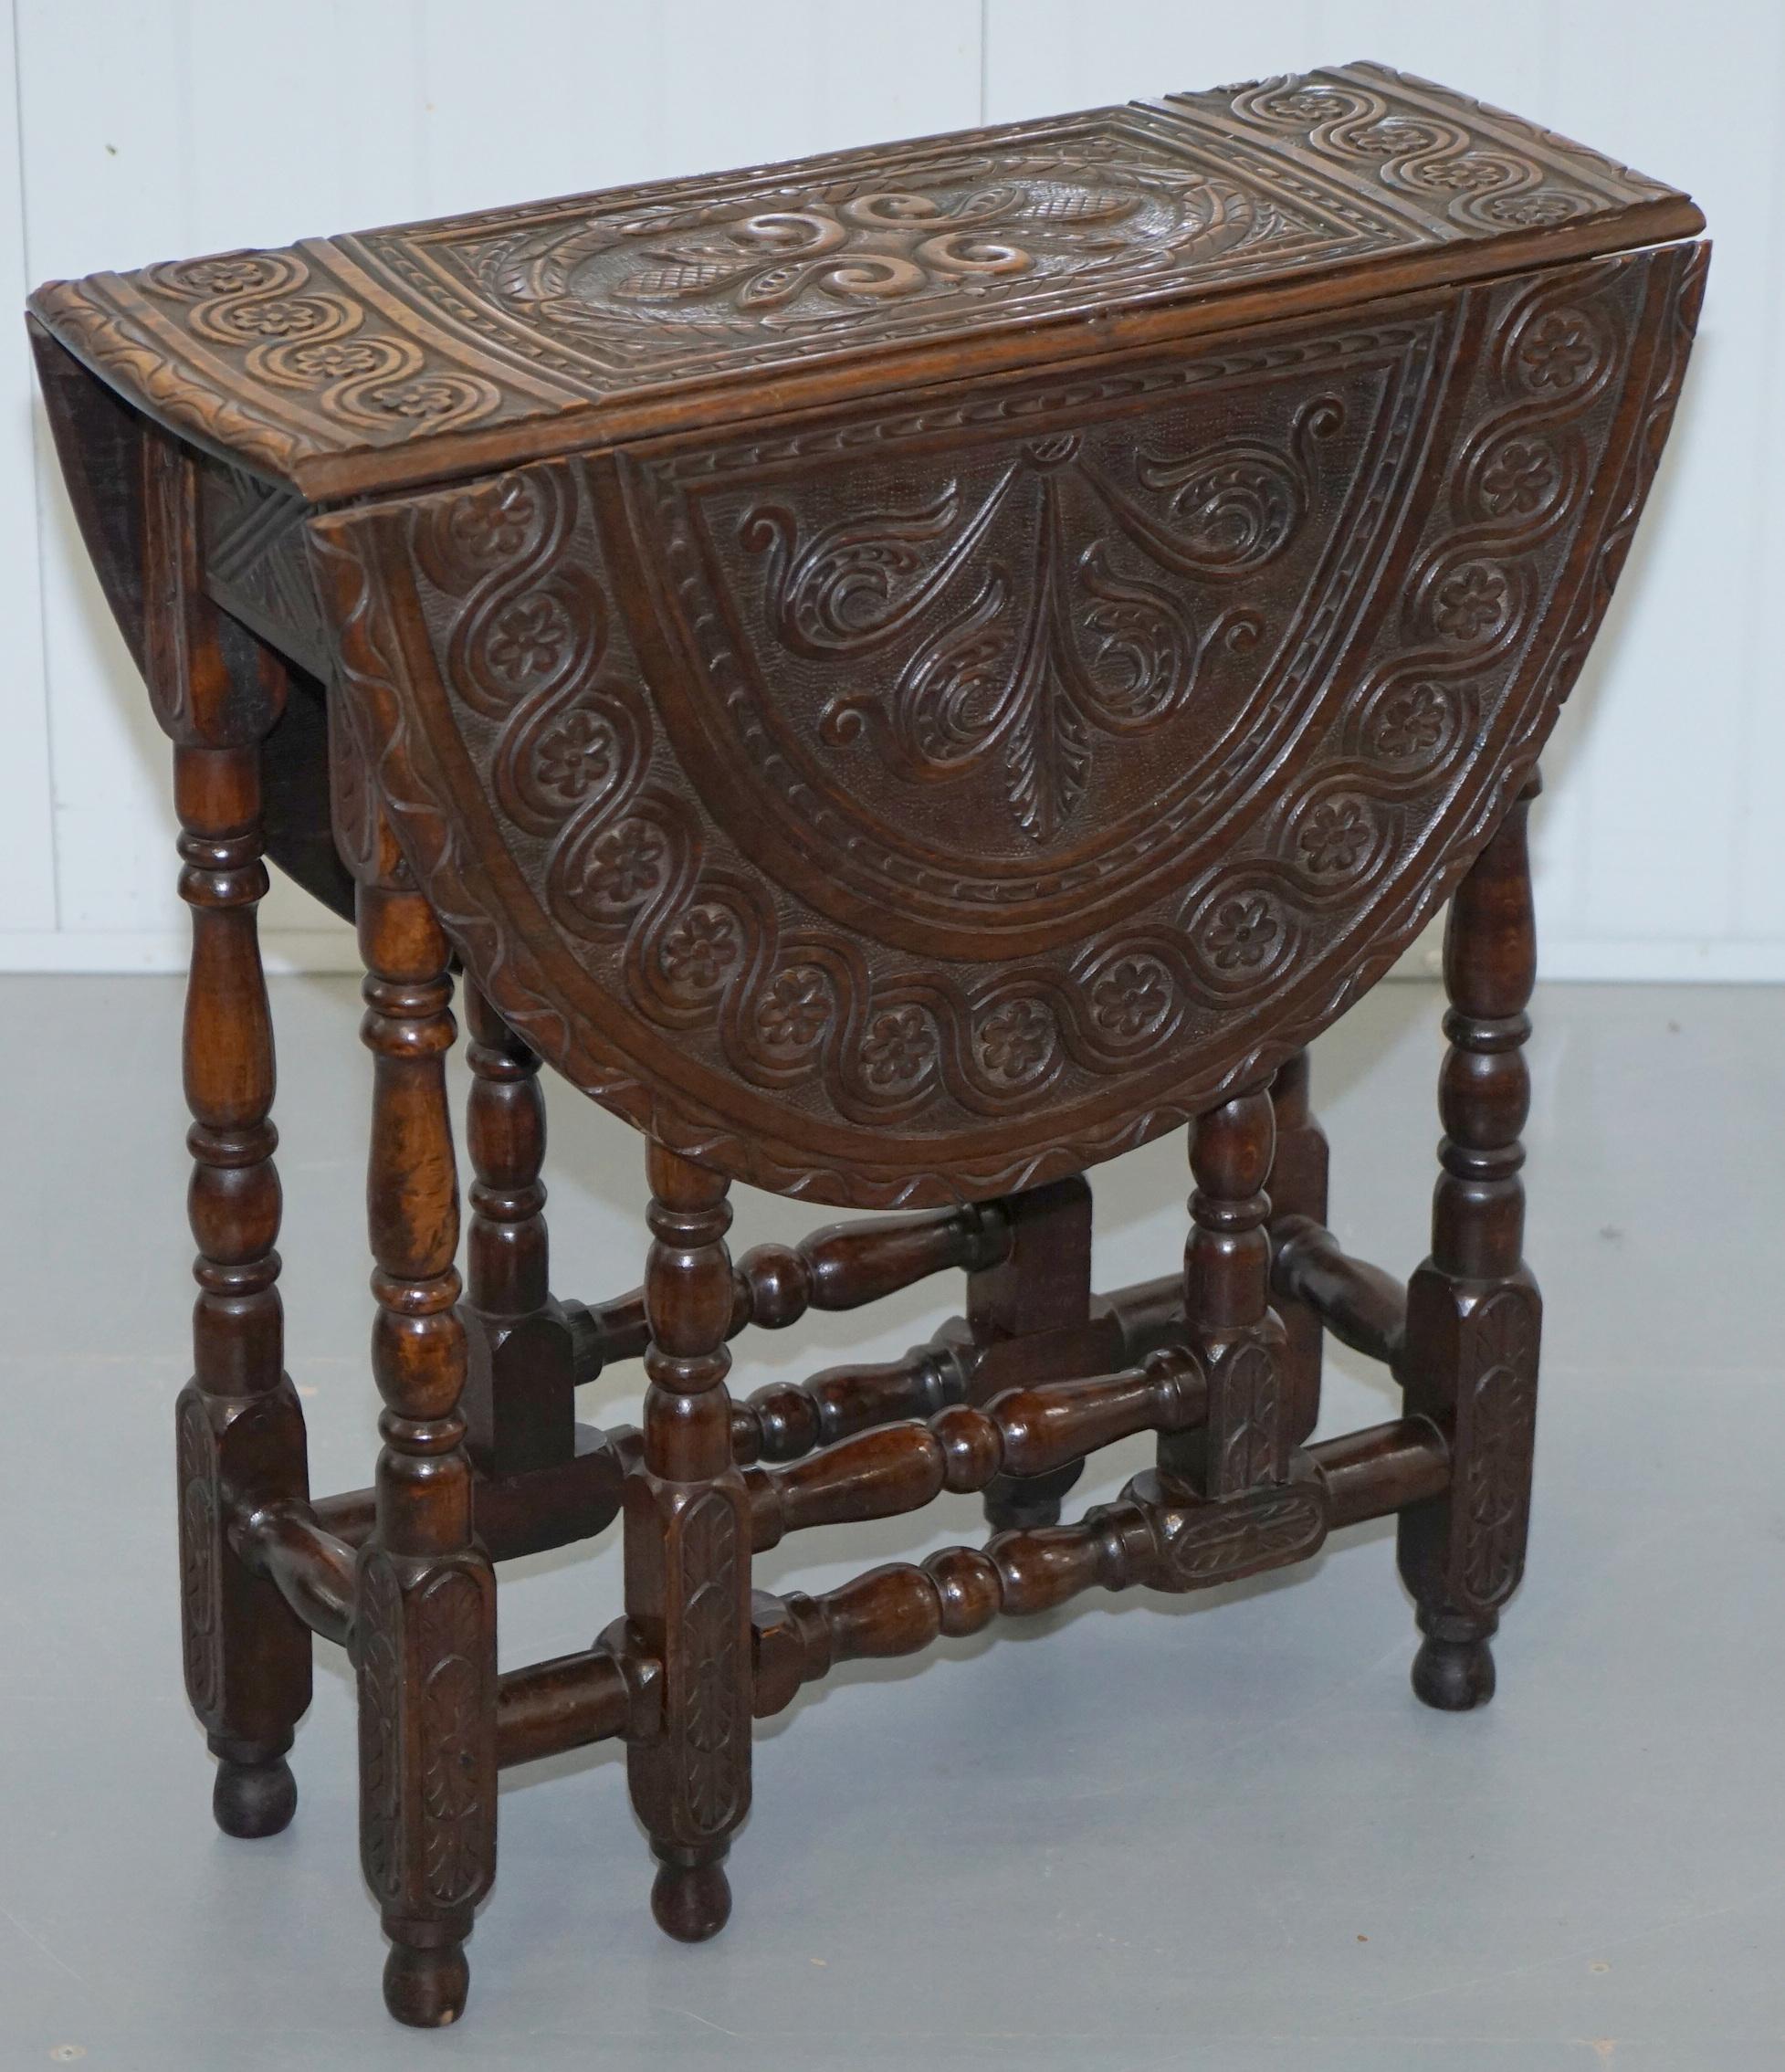 British Rare Find Georgian Hand-Carved Gate Leg Small Occasional Side Table Folding